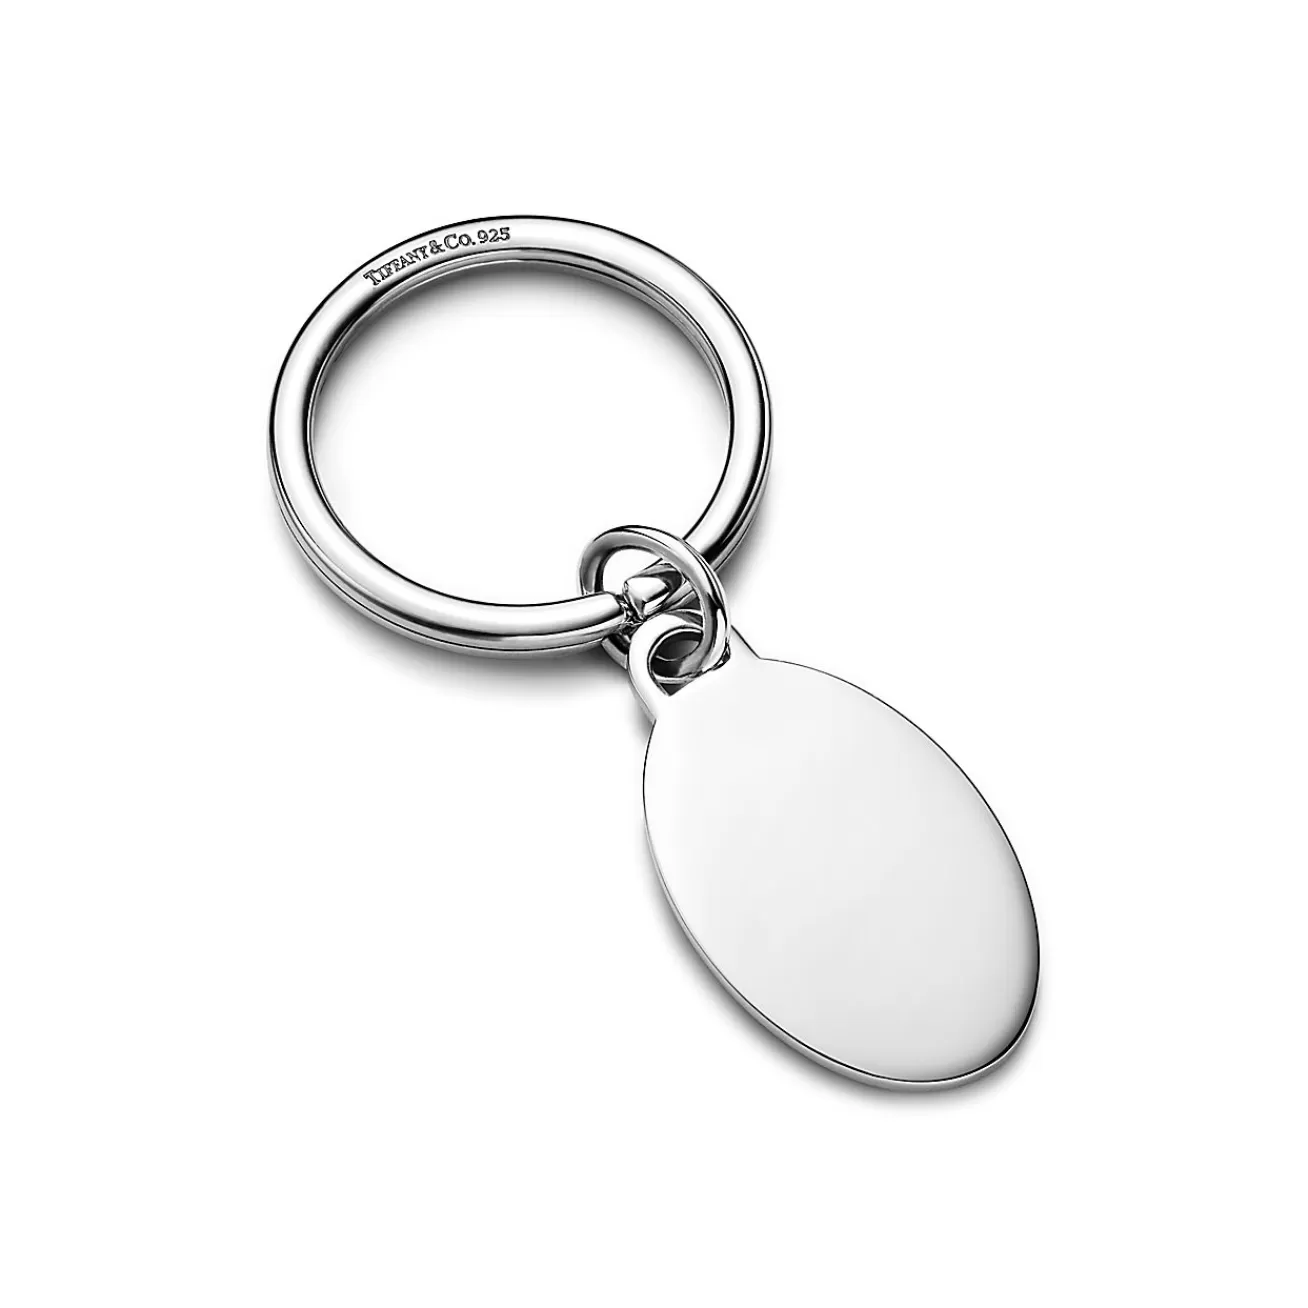 Tiffany & Co. Oval tag key ring in sterling silver. | ^ Key Rings | Accessories